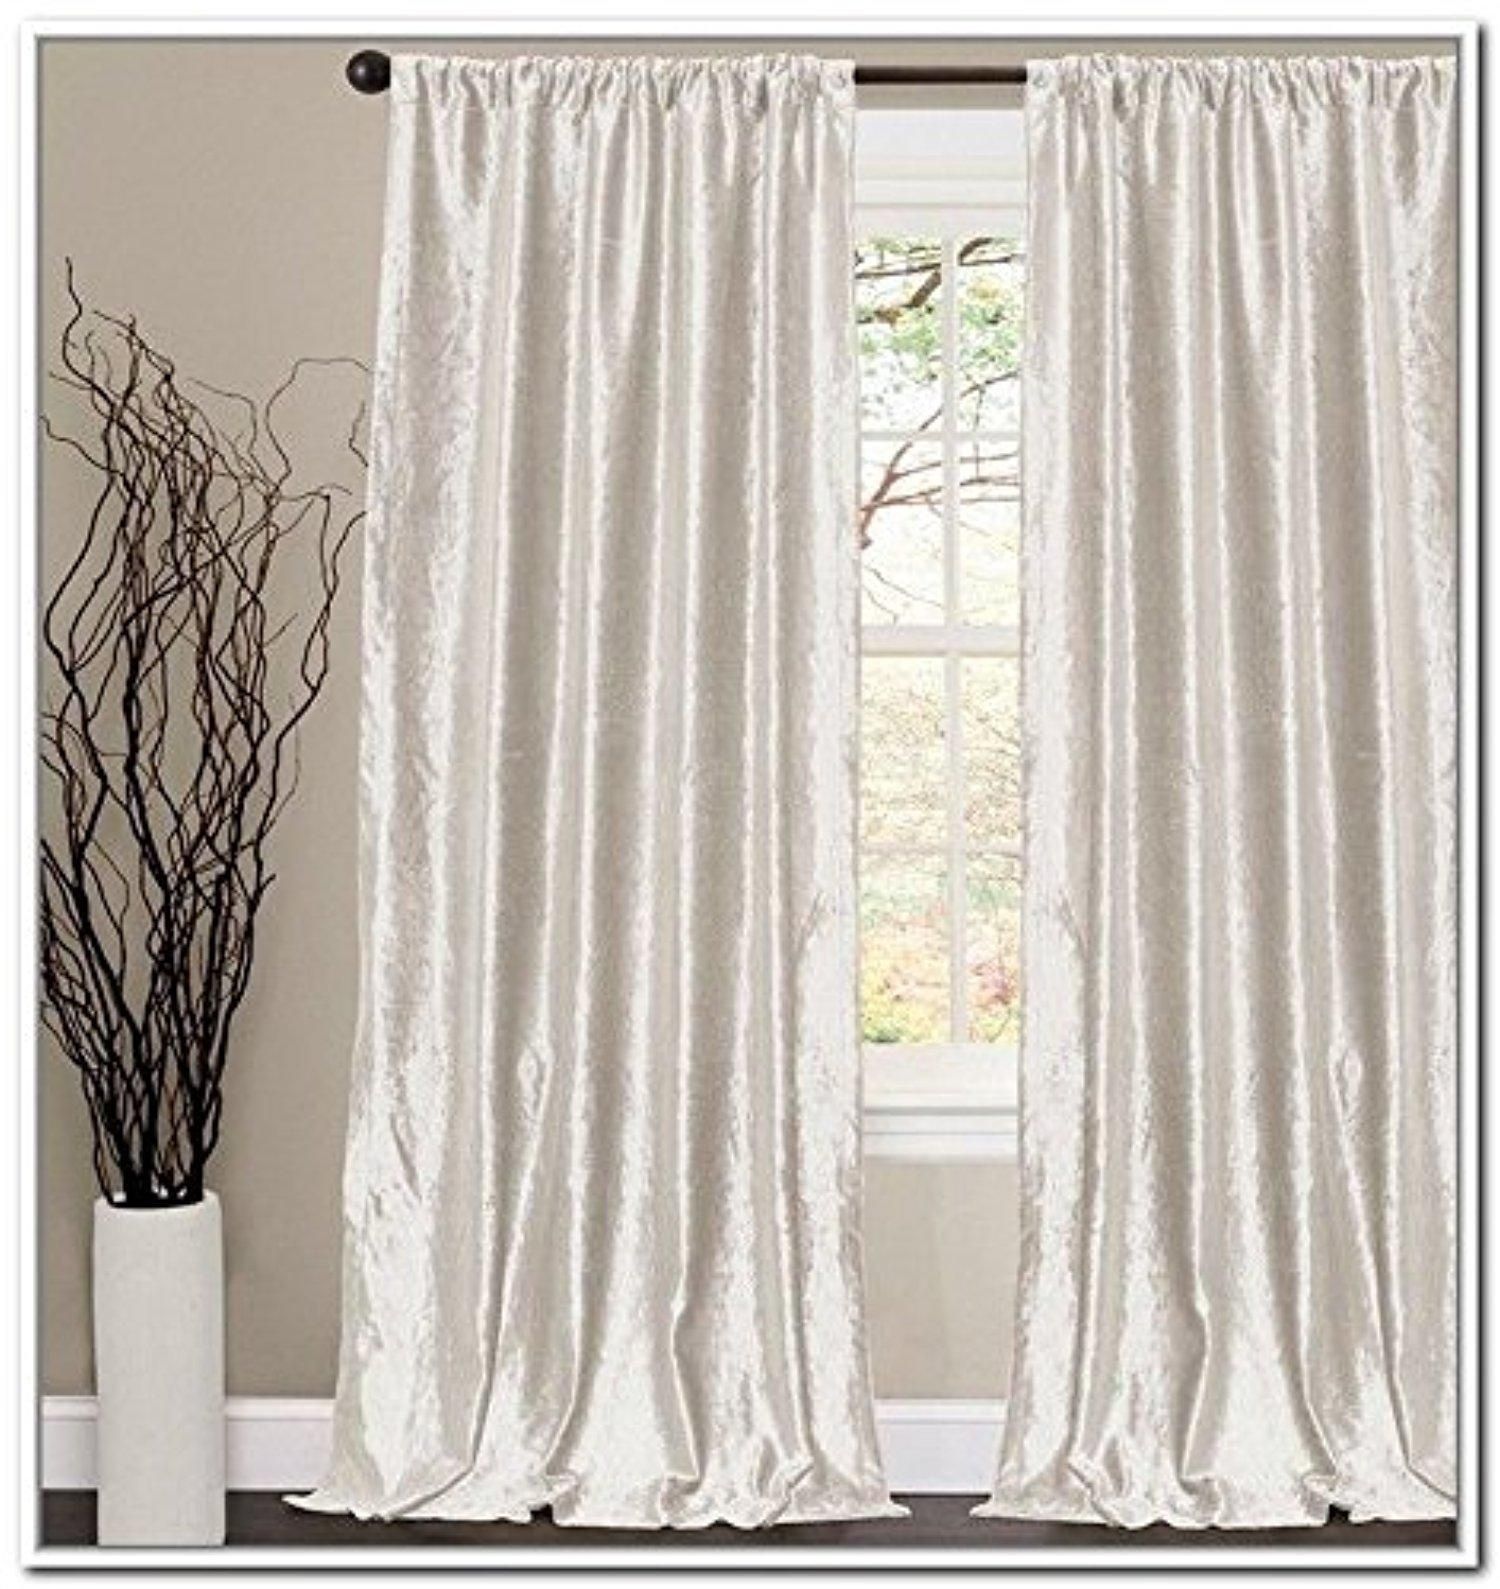 Off White Thick Velvet Curtains Absolute Blackout 52w 96 Inside White Thick Curtains (View 3 of 15)